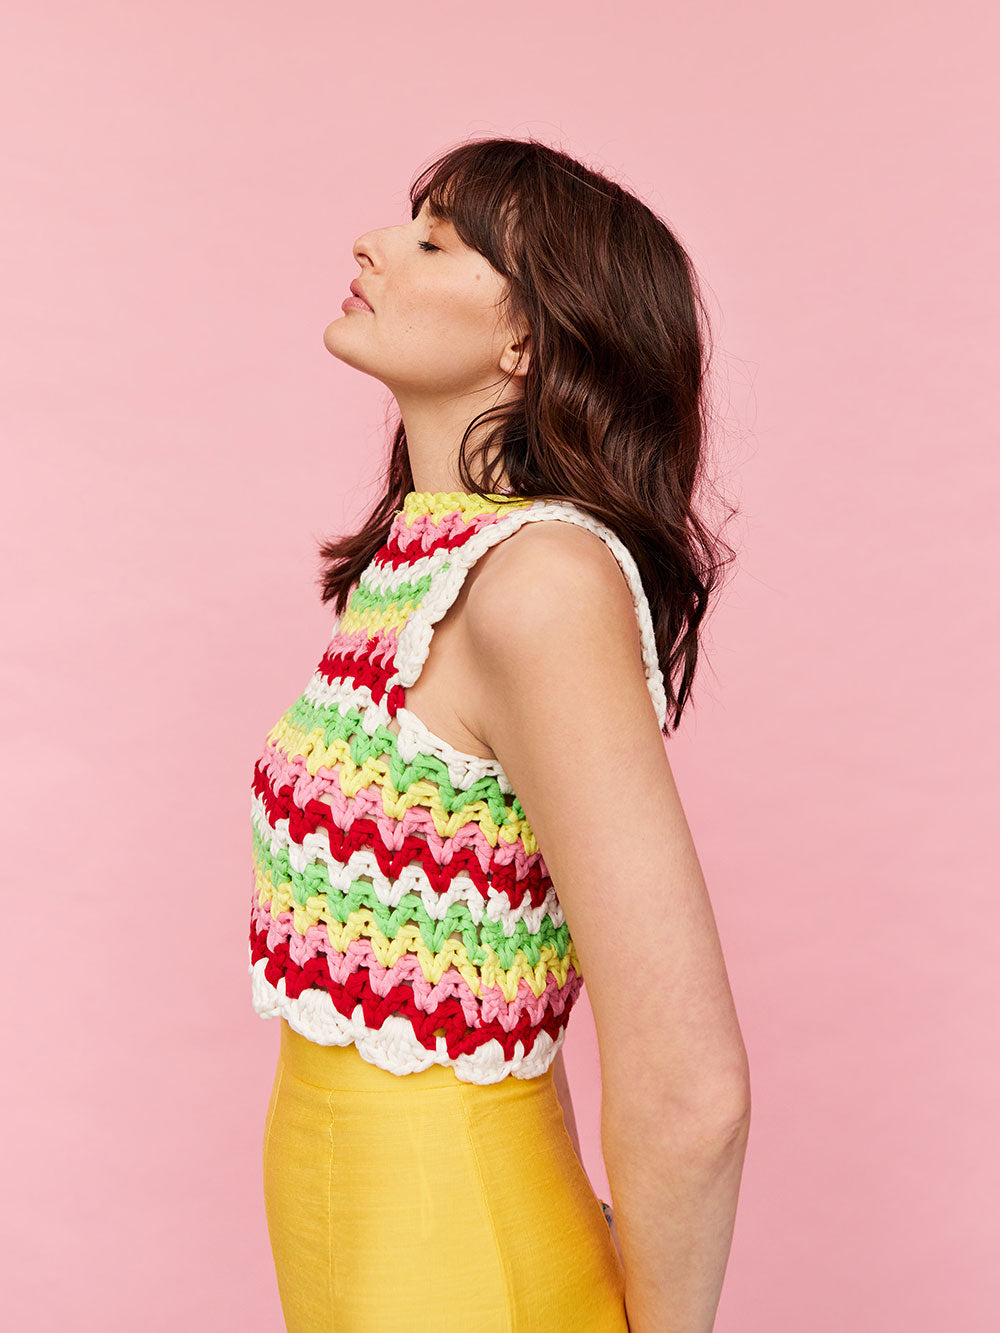 Woman with dark wavy hair is side on to the camera, she is wearing a colourful, crocheted cotton stripe tank top and yellow pants.